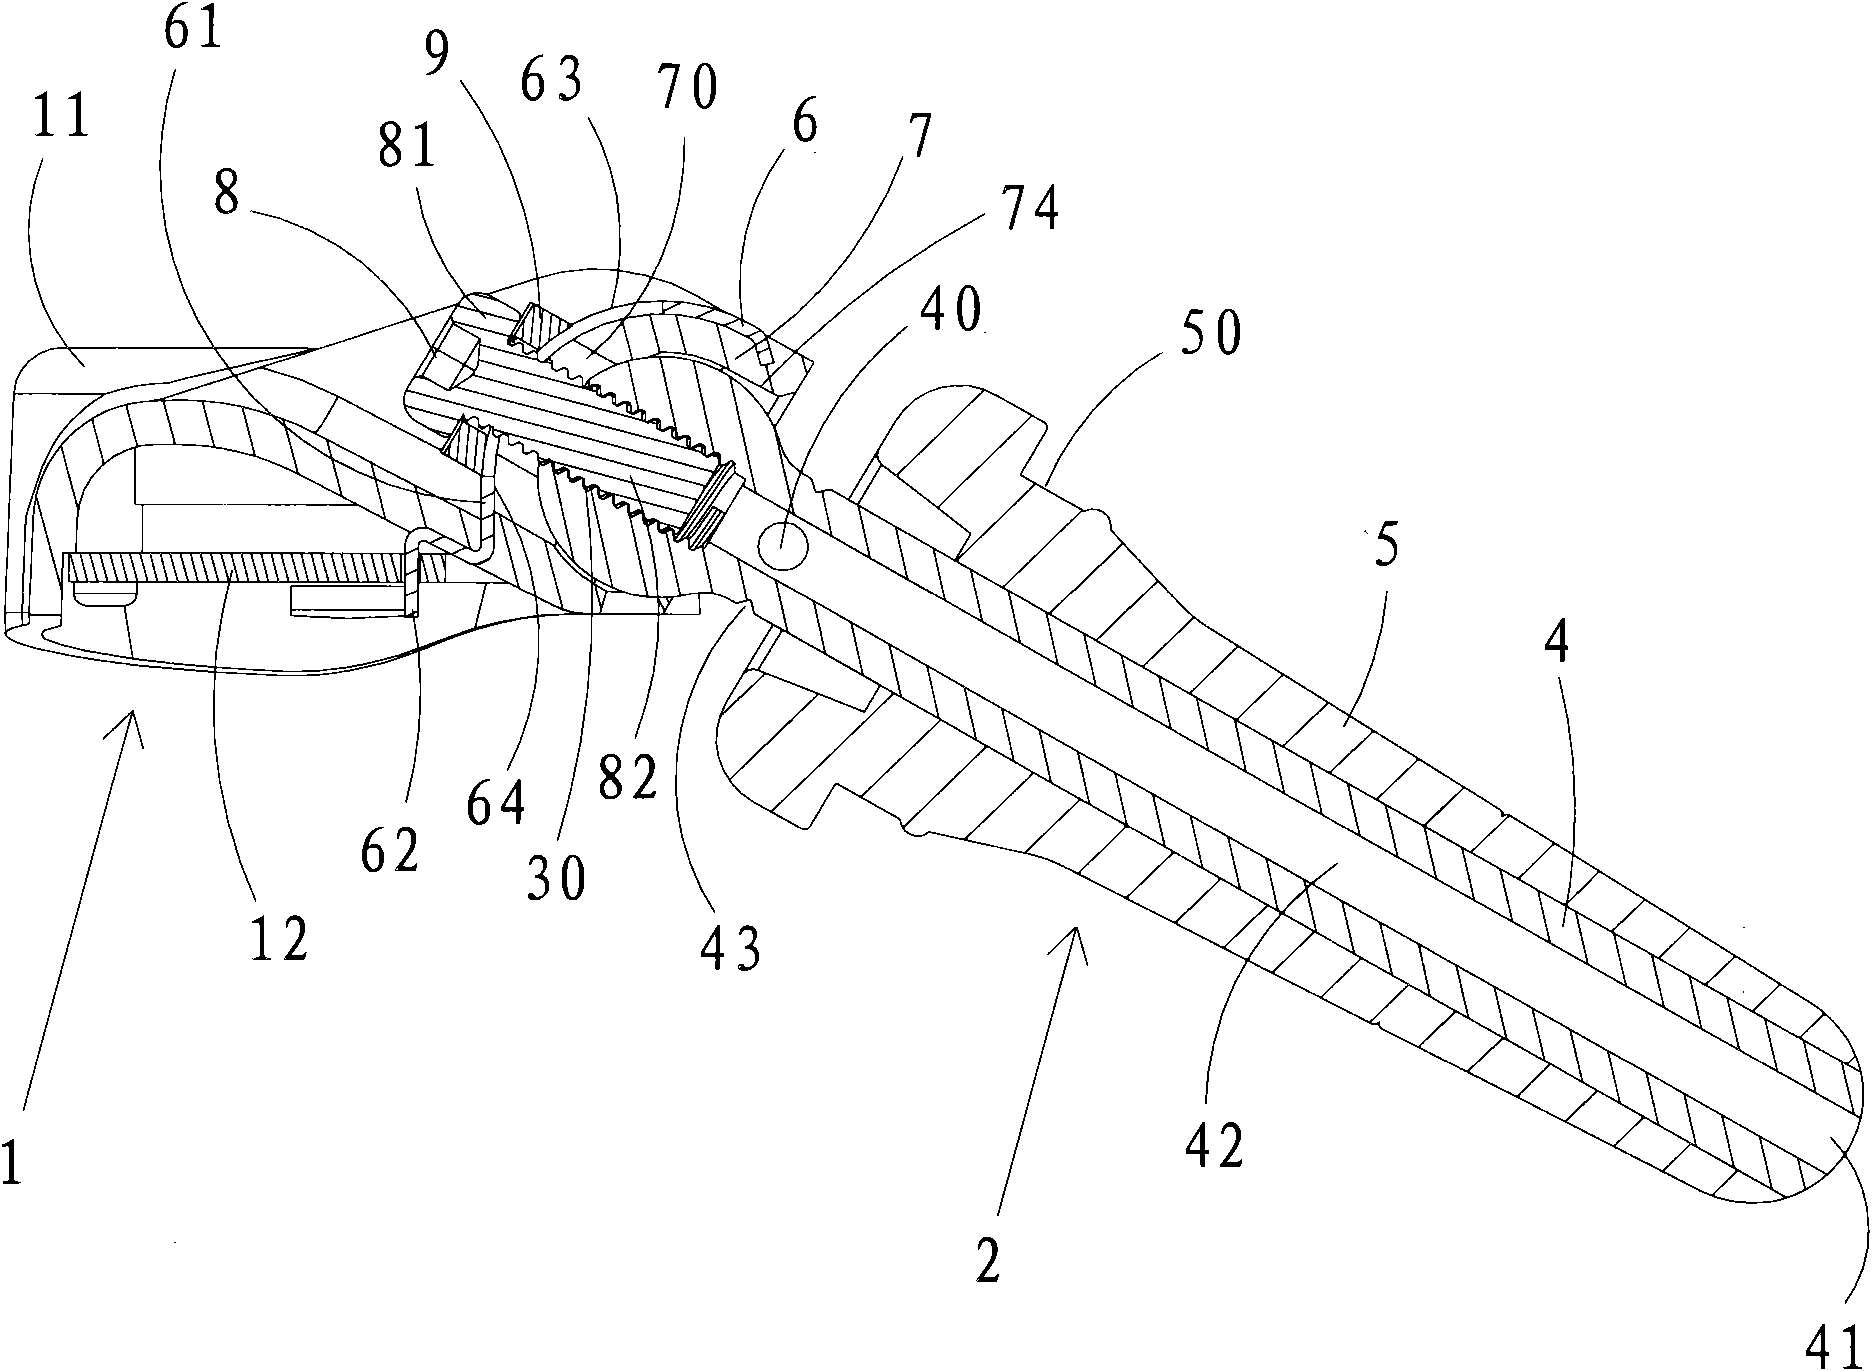 Signal transmitting device with air tap tire gauge